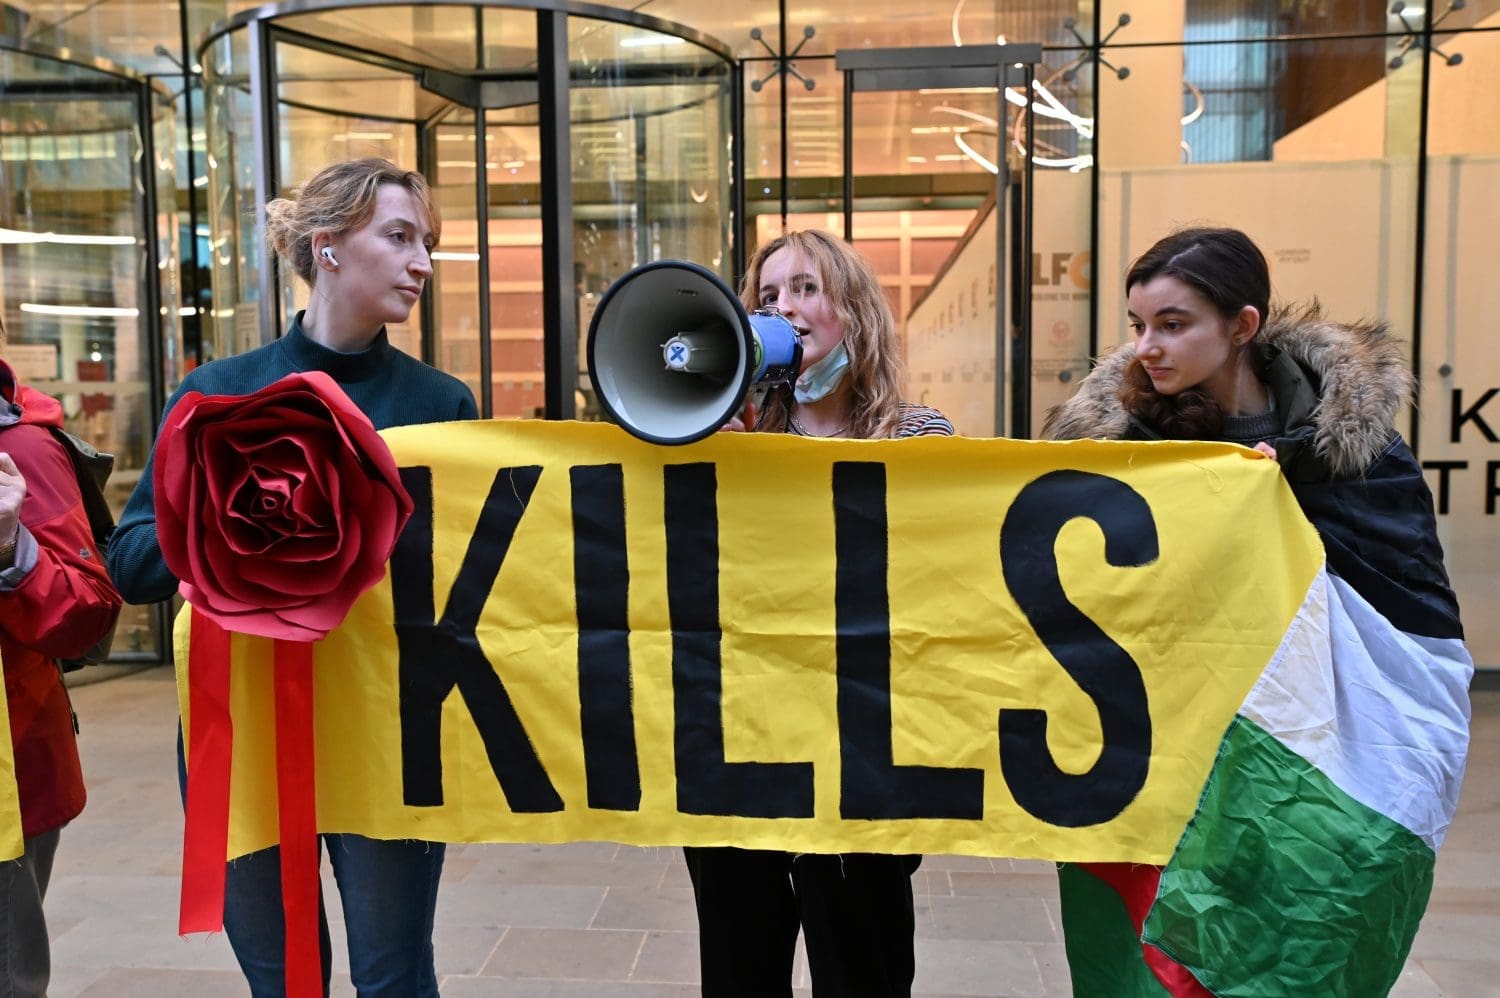 Fossil Free London activists hold one half of a banner which reads "Ithaca Kills". One protester is wrapped in the Palestinian flag. 